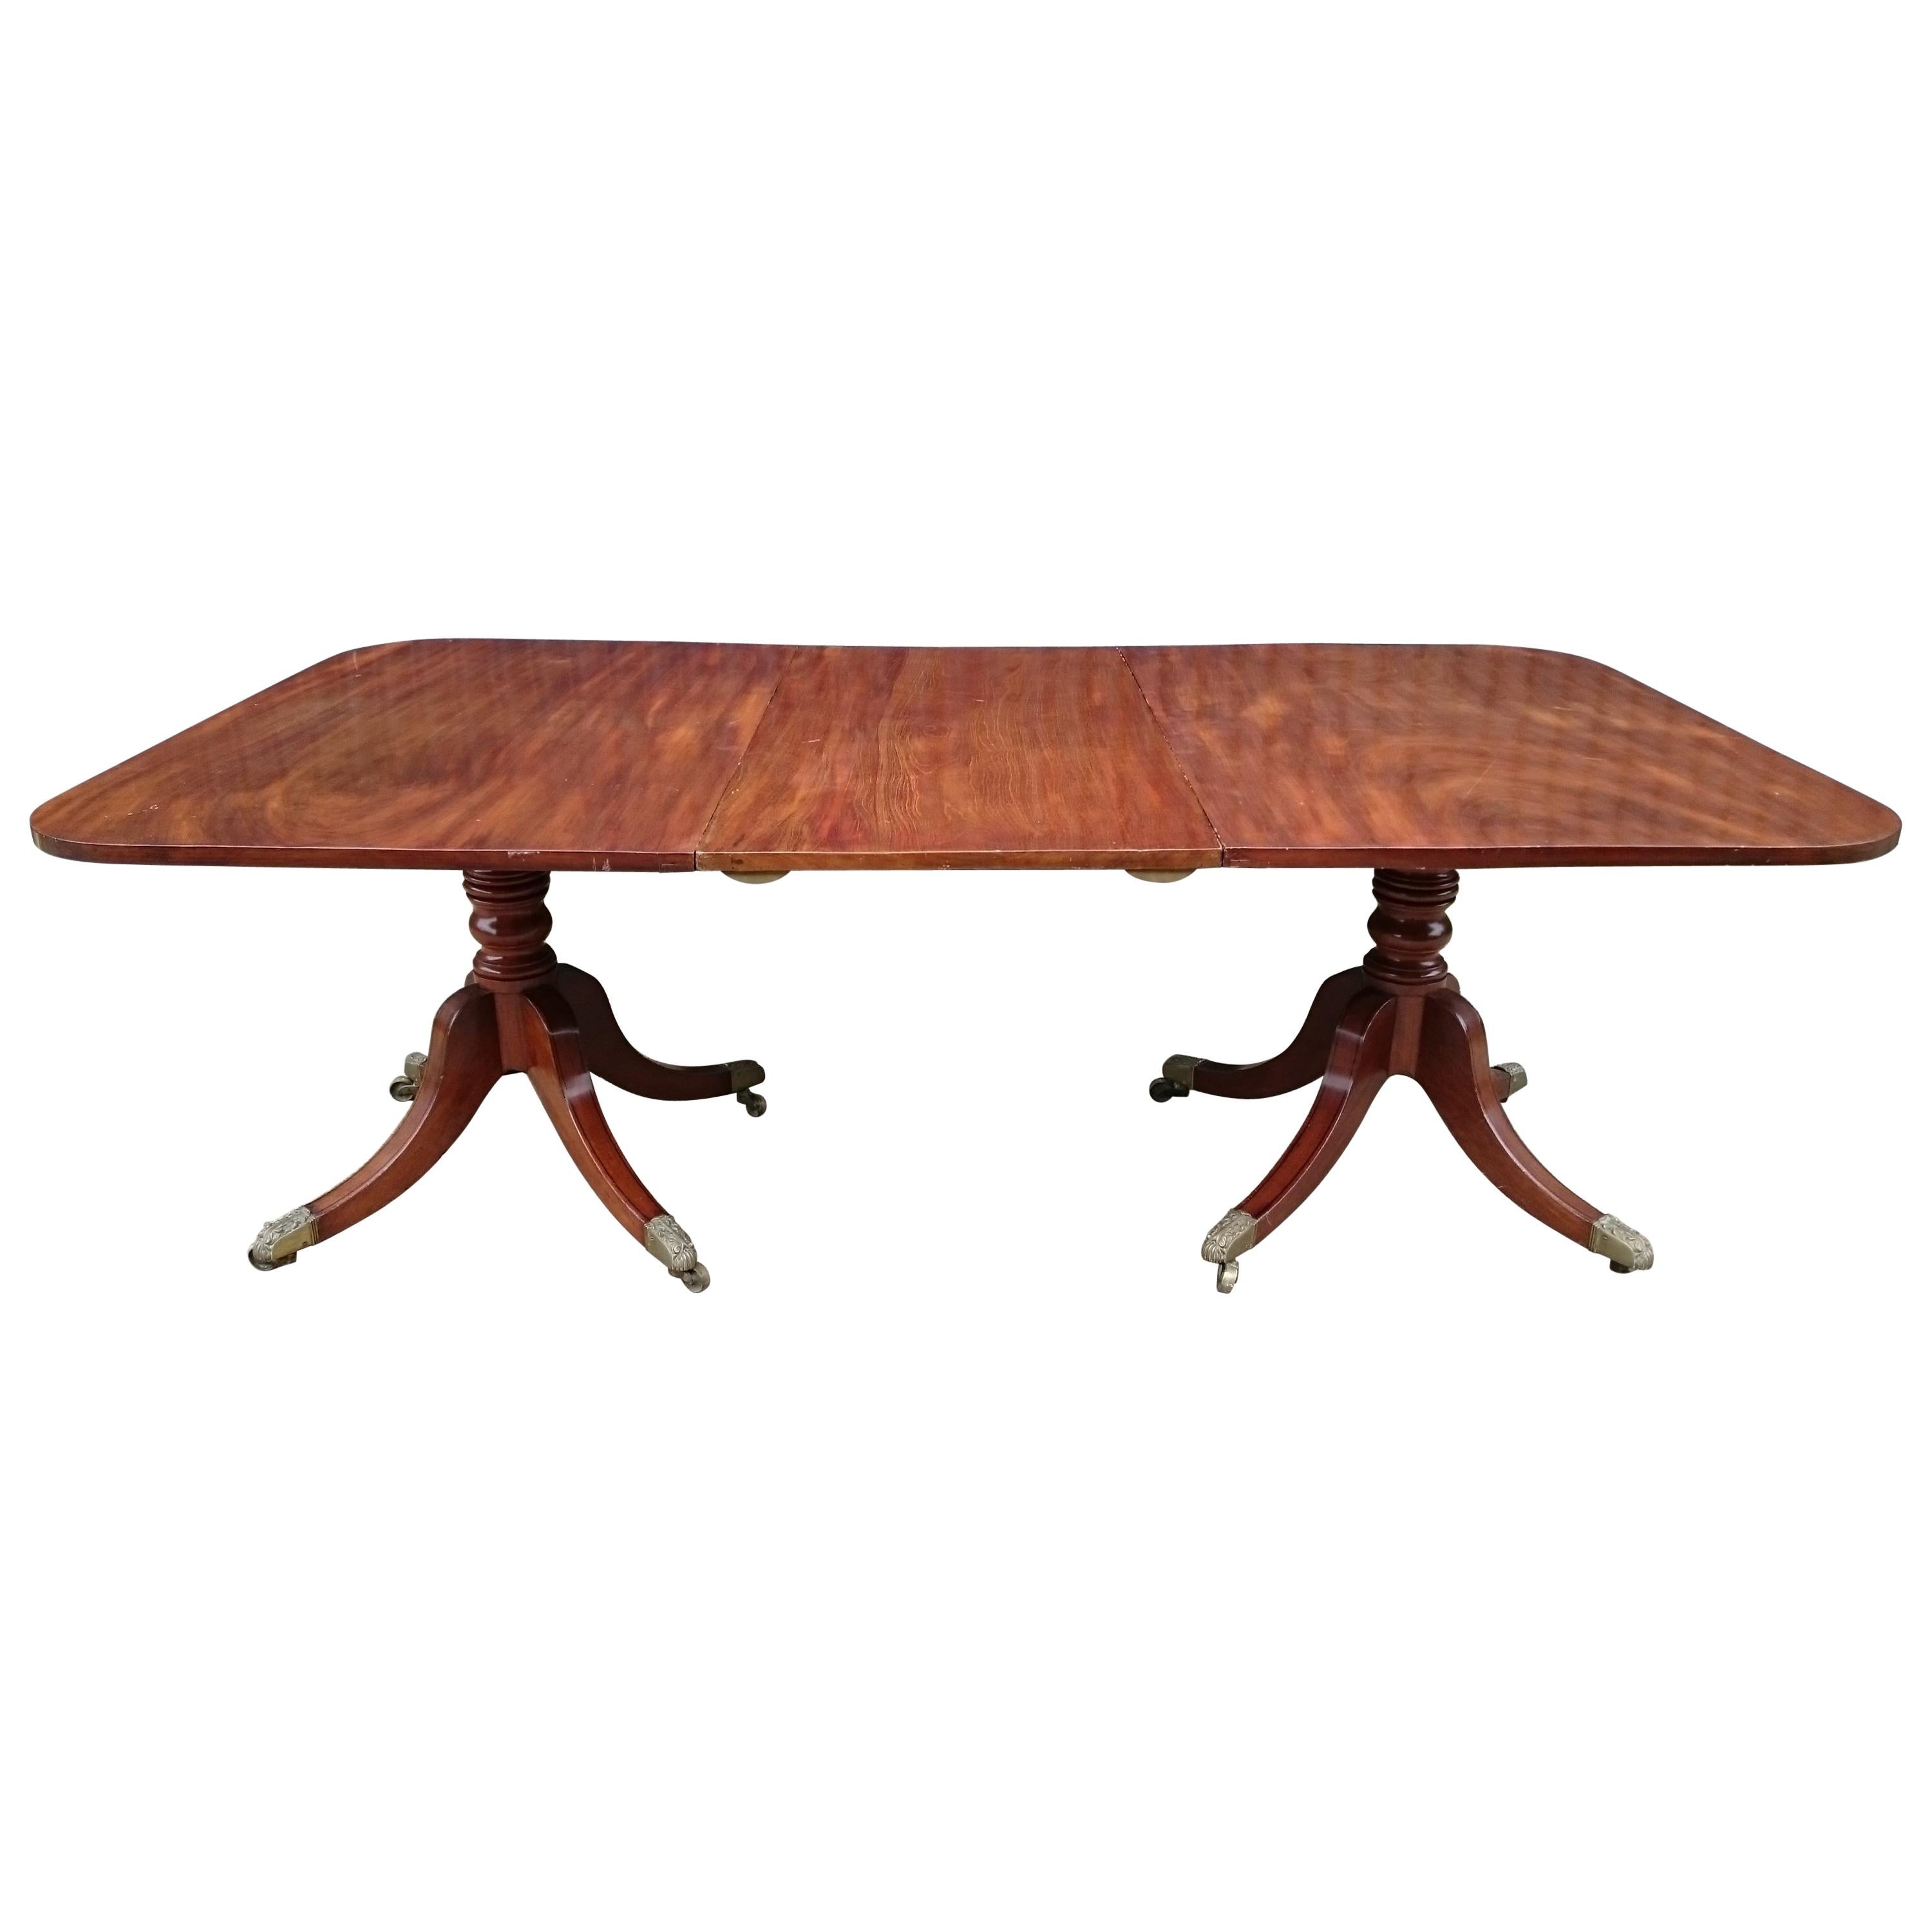 Early 19th Century Regency Mahogany Antique Twin Pedestal Dining Table For Sale